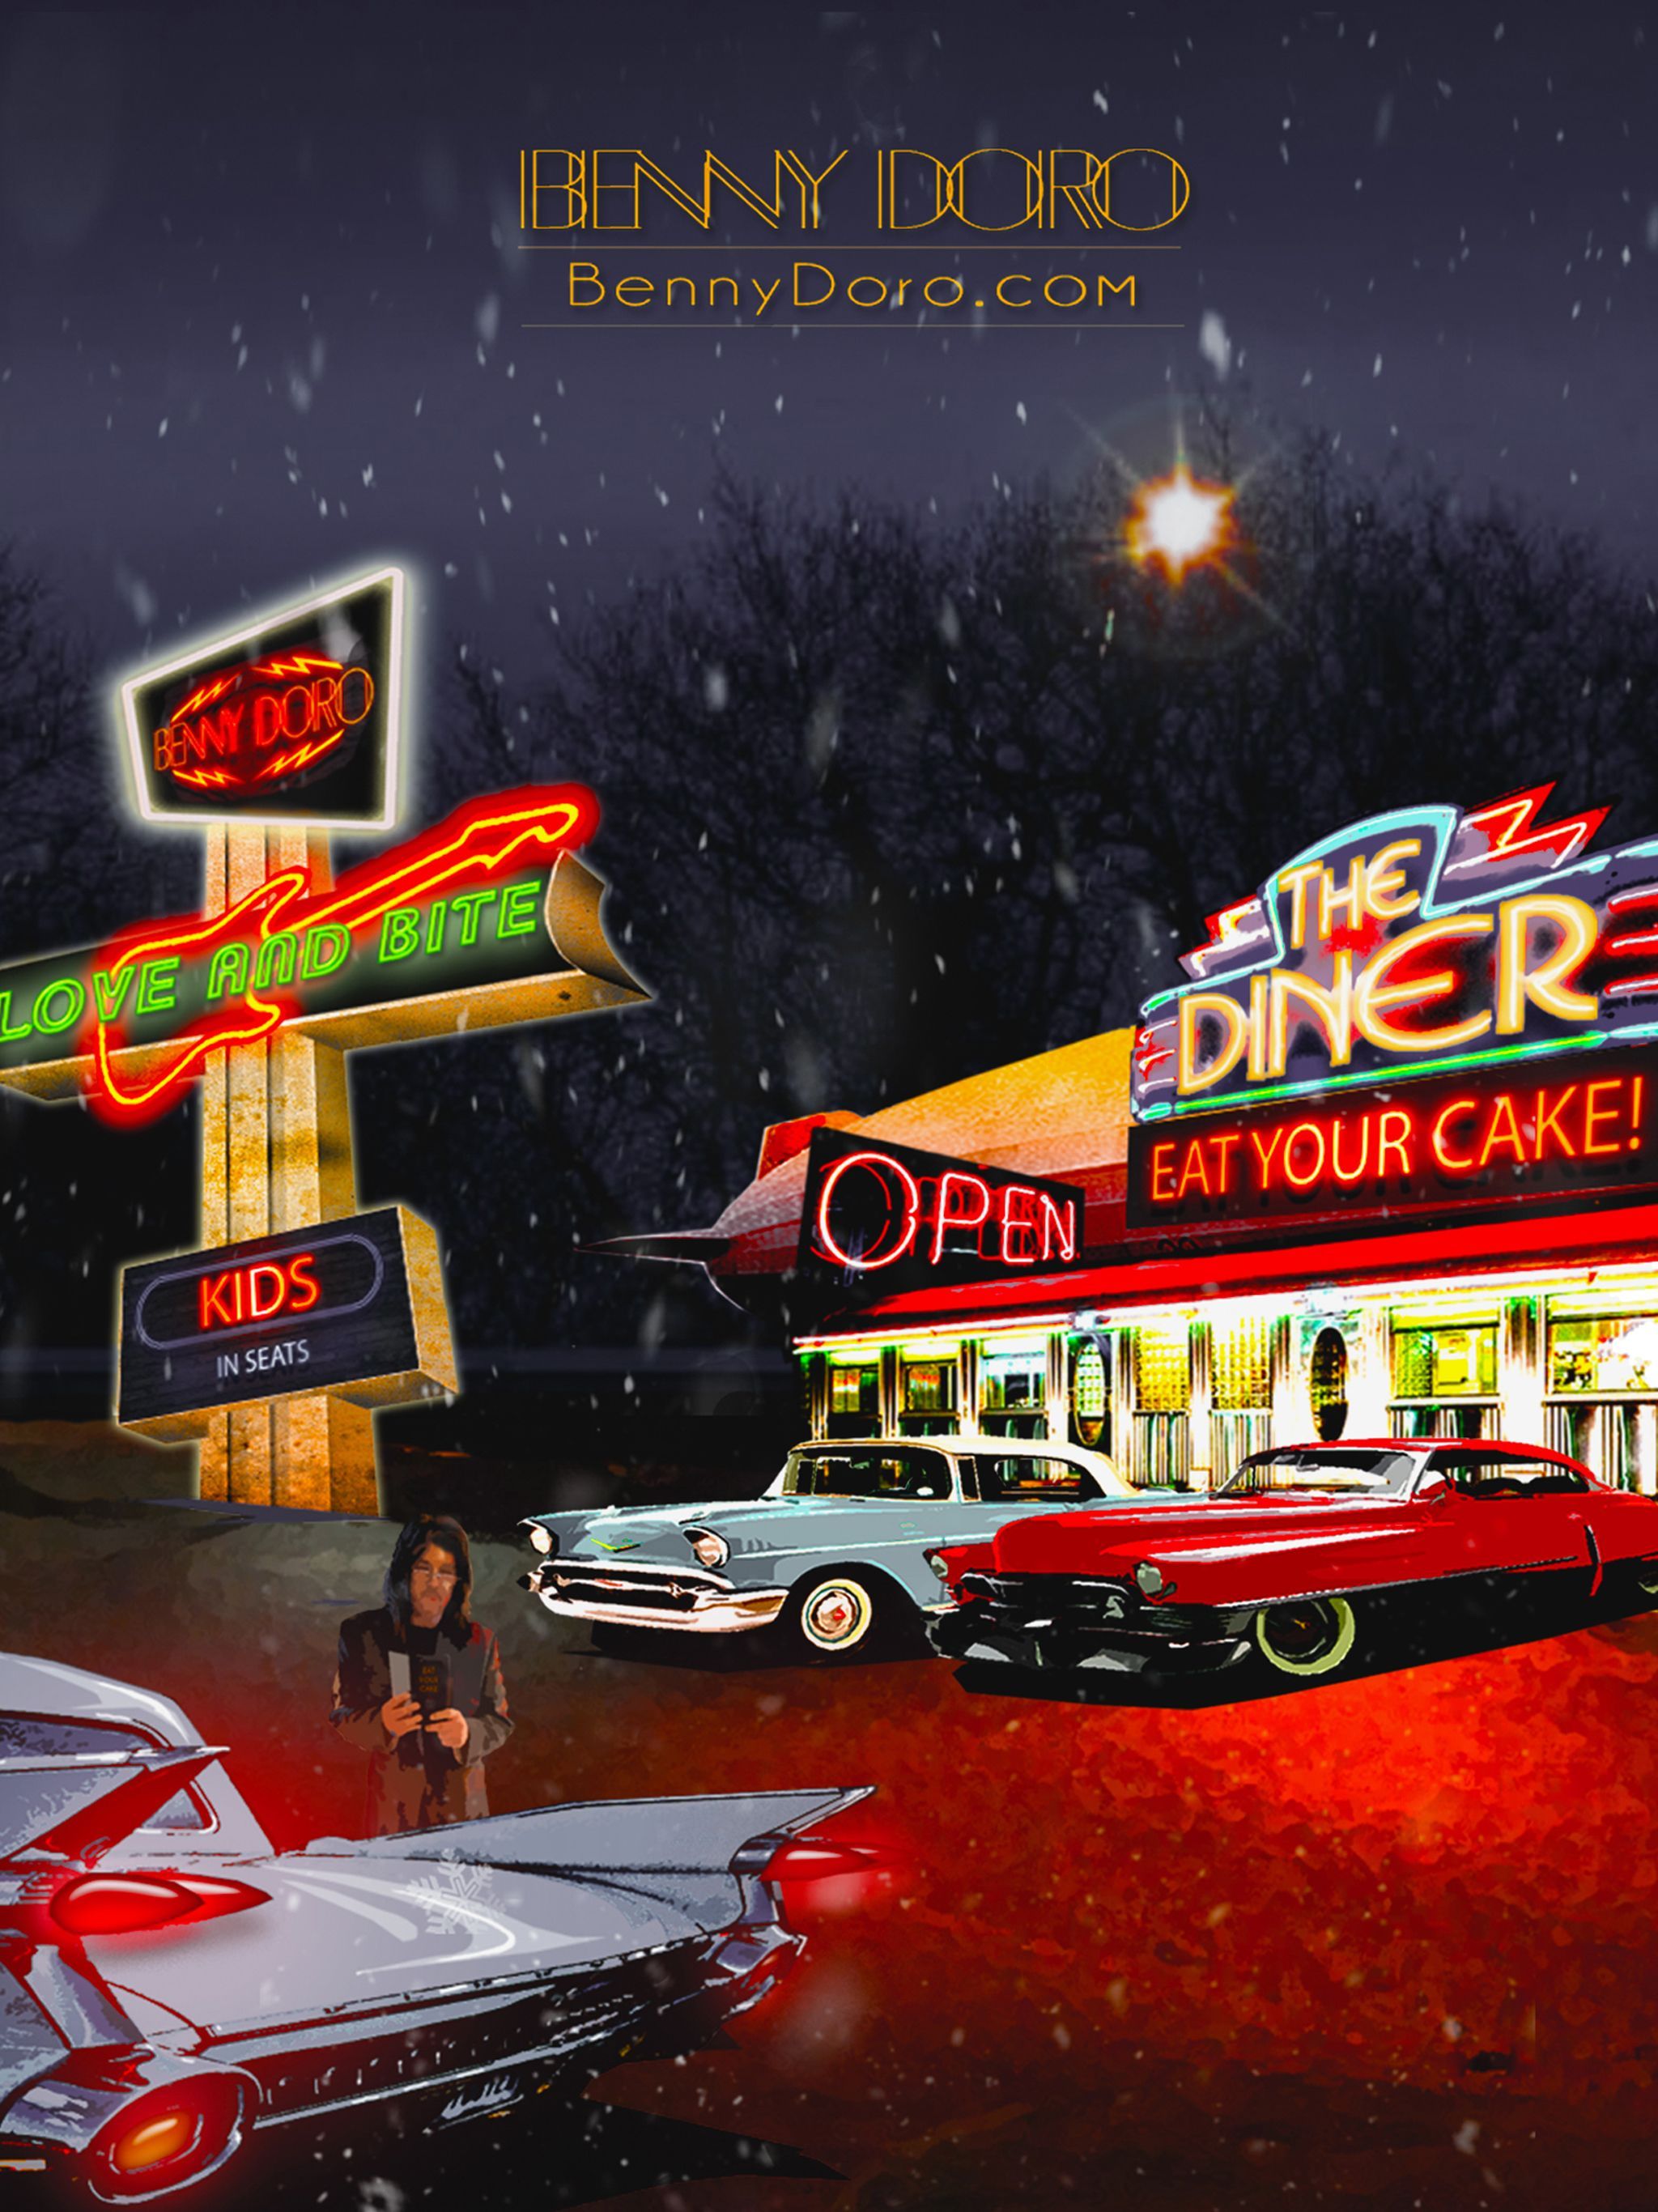 Digital painting of a diner with a woman standing in front of a sign that says 